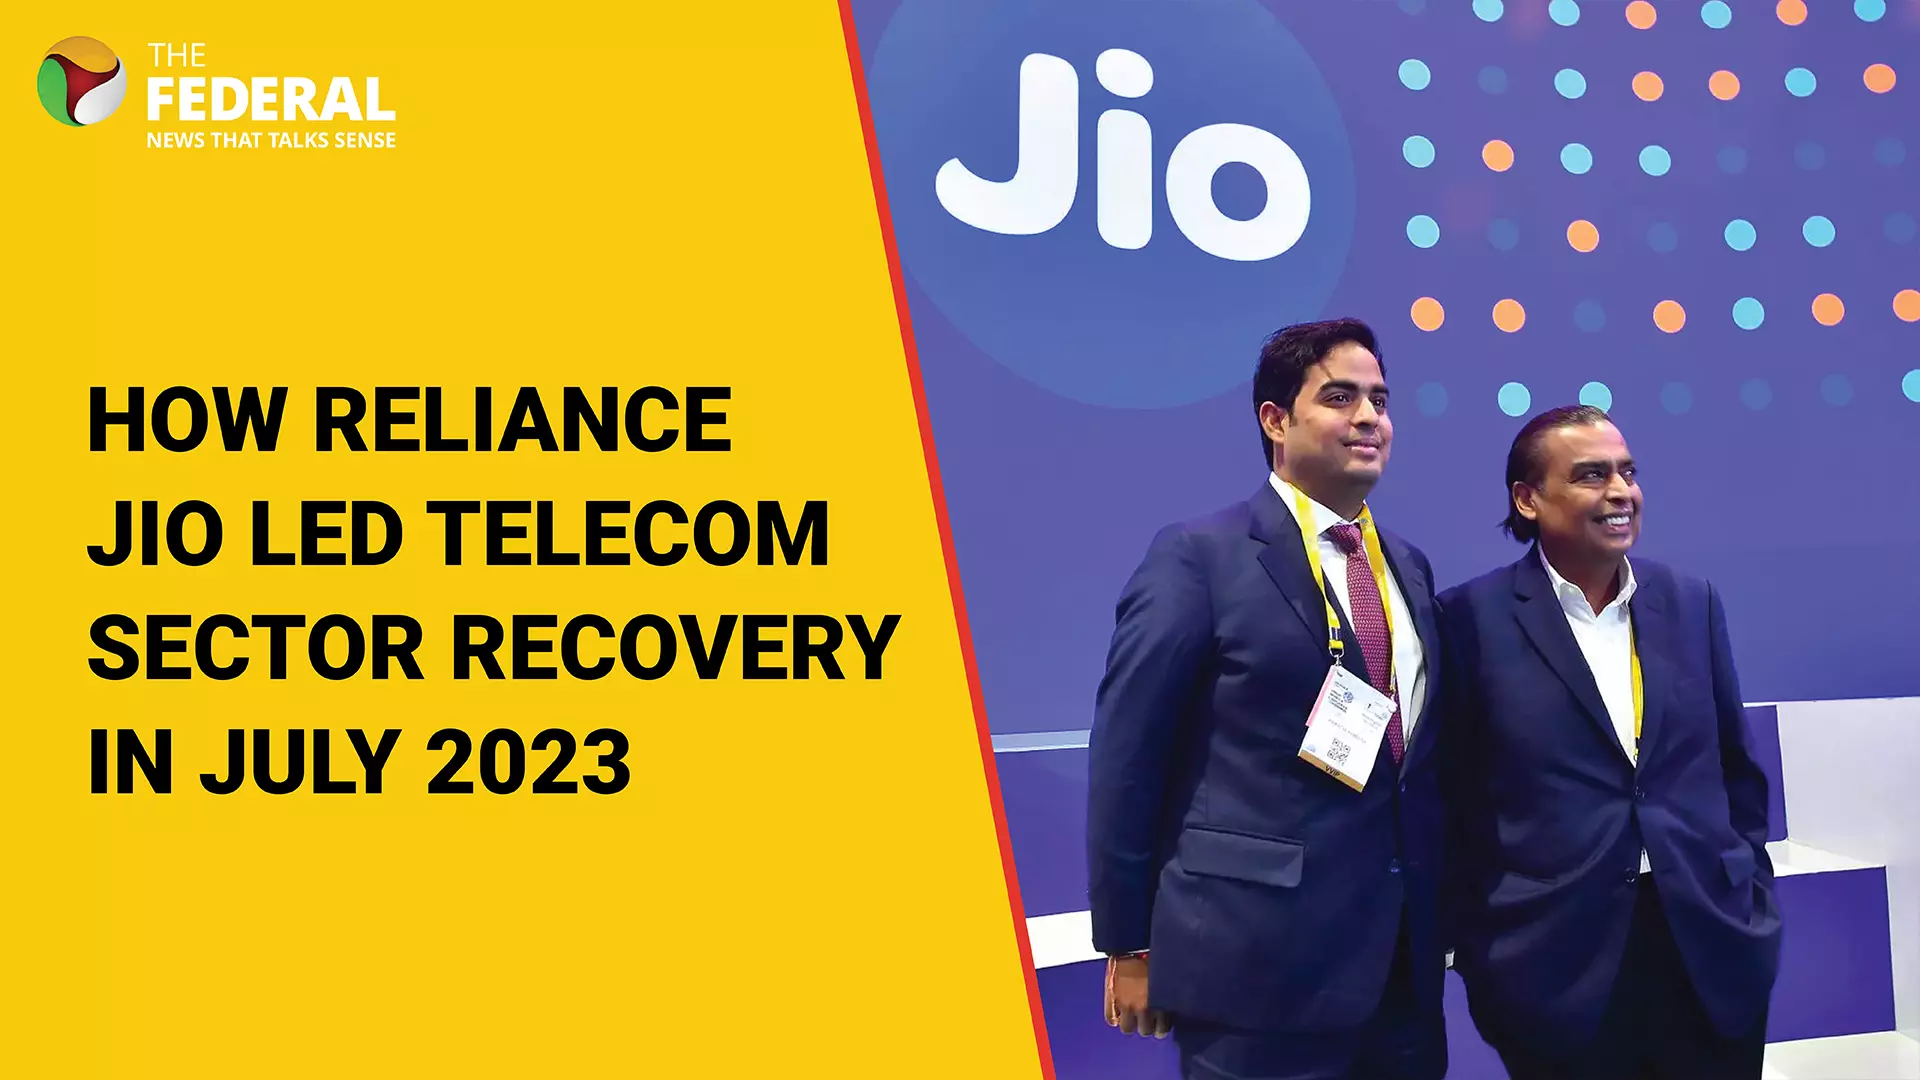 How Reliance Jio led telecom sector recovery in July 2023